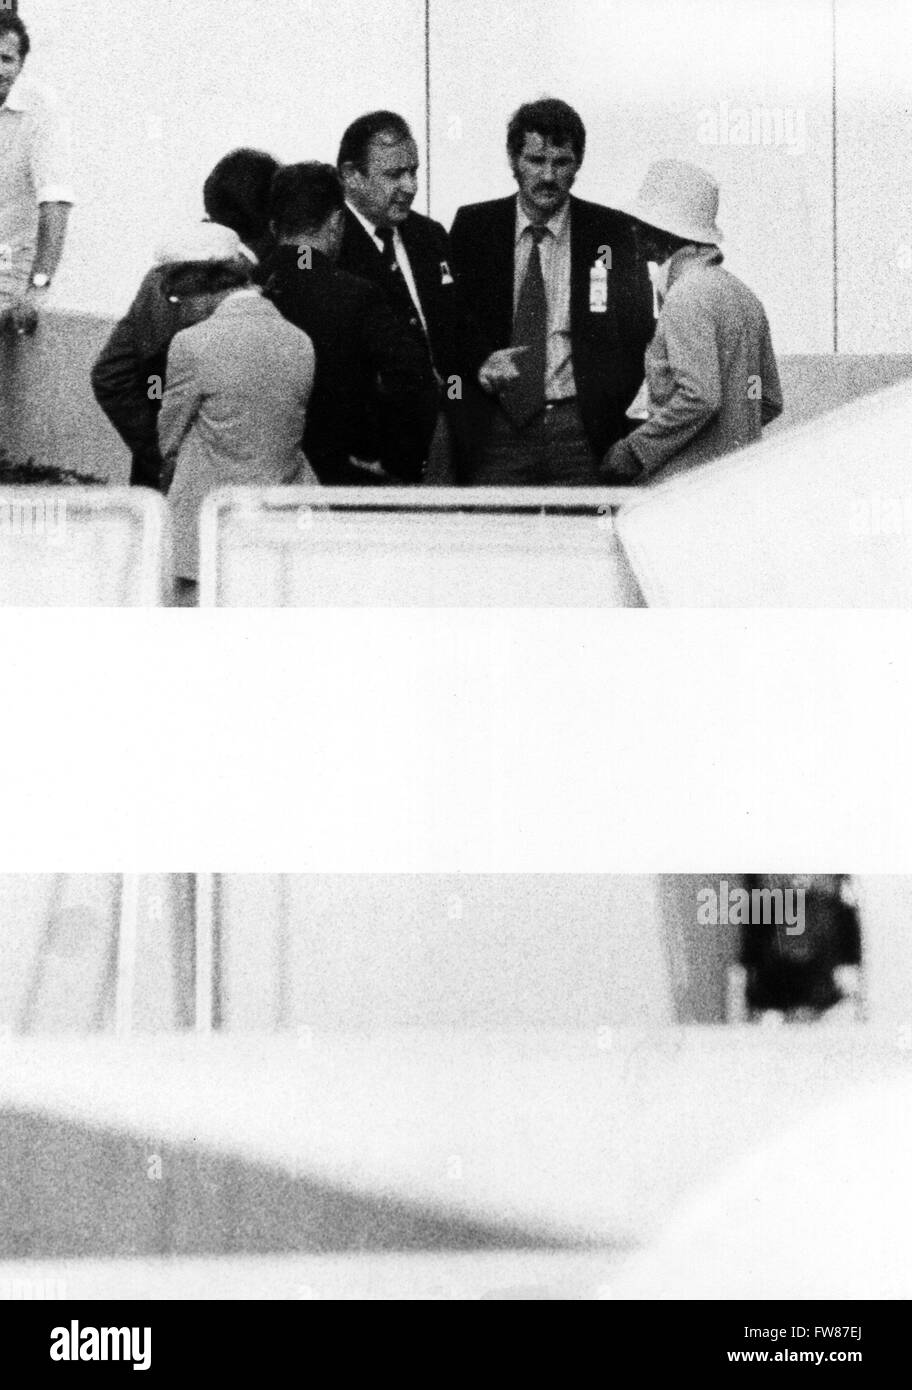 Minister of the Interior Hans-Dietrich Genscher (3rd of right) and further officials negotiate with an Arab terrorist (r) on 05 September 1972 in the Israeli crew's quarters in the Olympic Village during the Olympic Games, where terrorists had violently entered the Village, killed two Israeli athletes and captured nine. Stock Photo